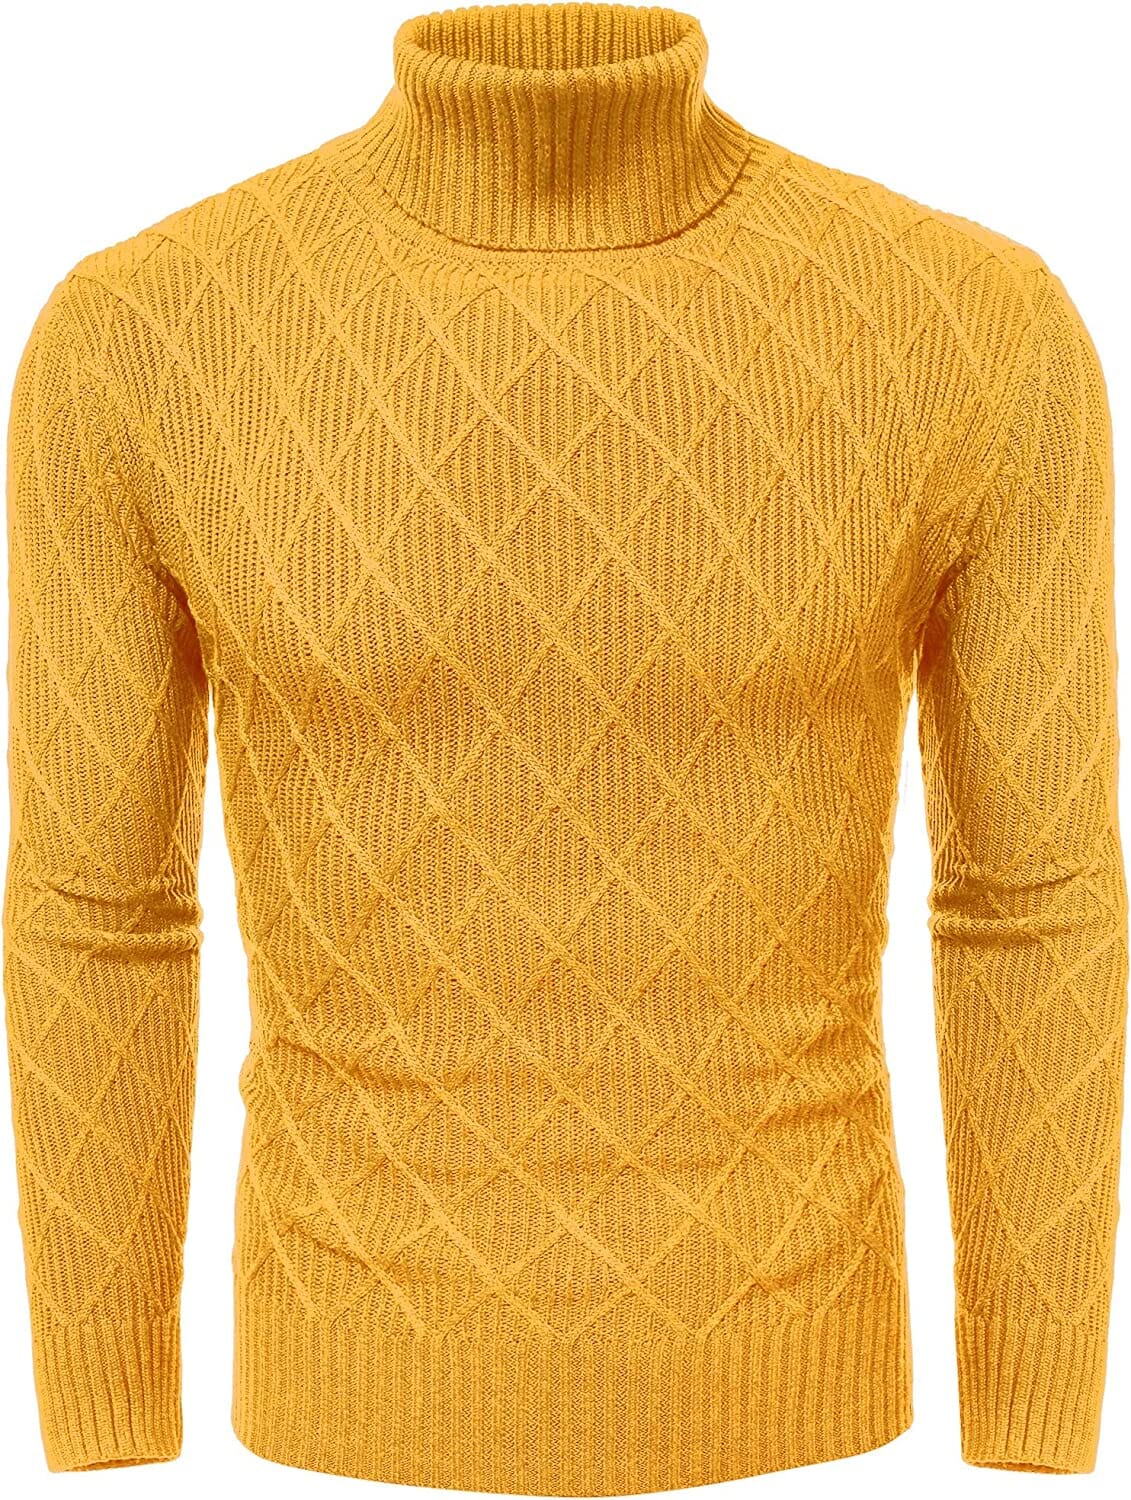 Slim Fit Thick Cotton Pullover Turtleneck Sweaters (US Only) Sweaters COOFANDY Store Yellow S 